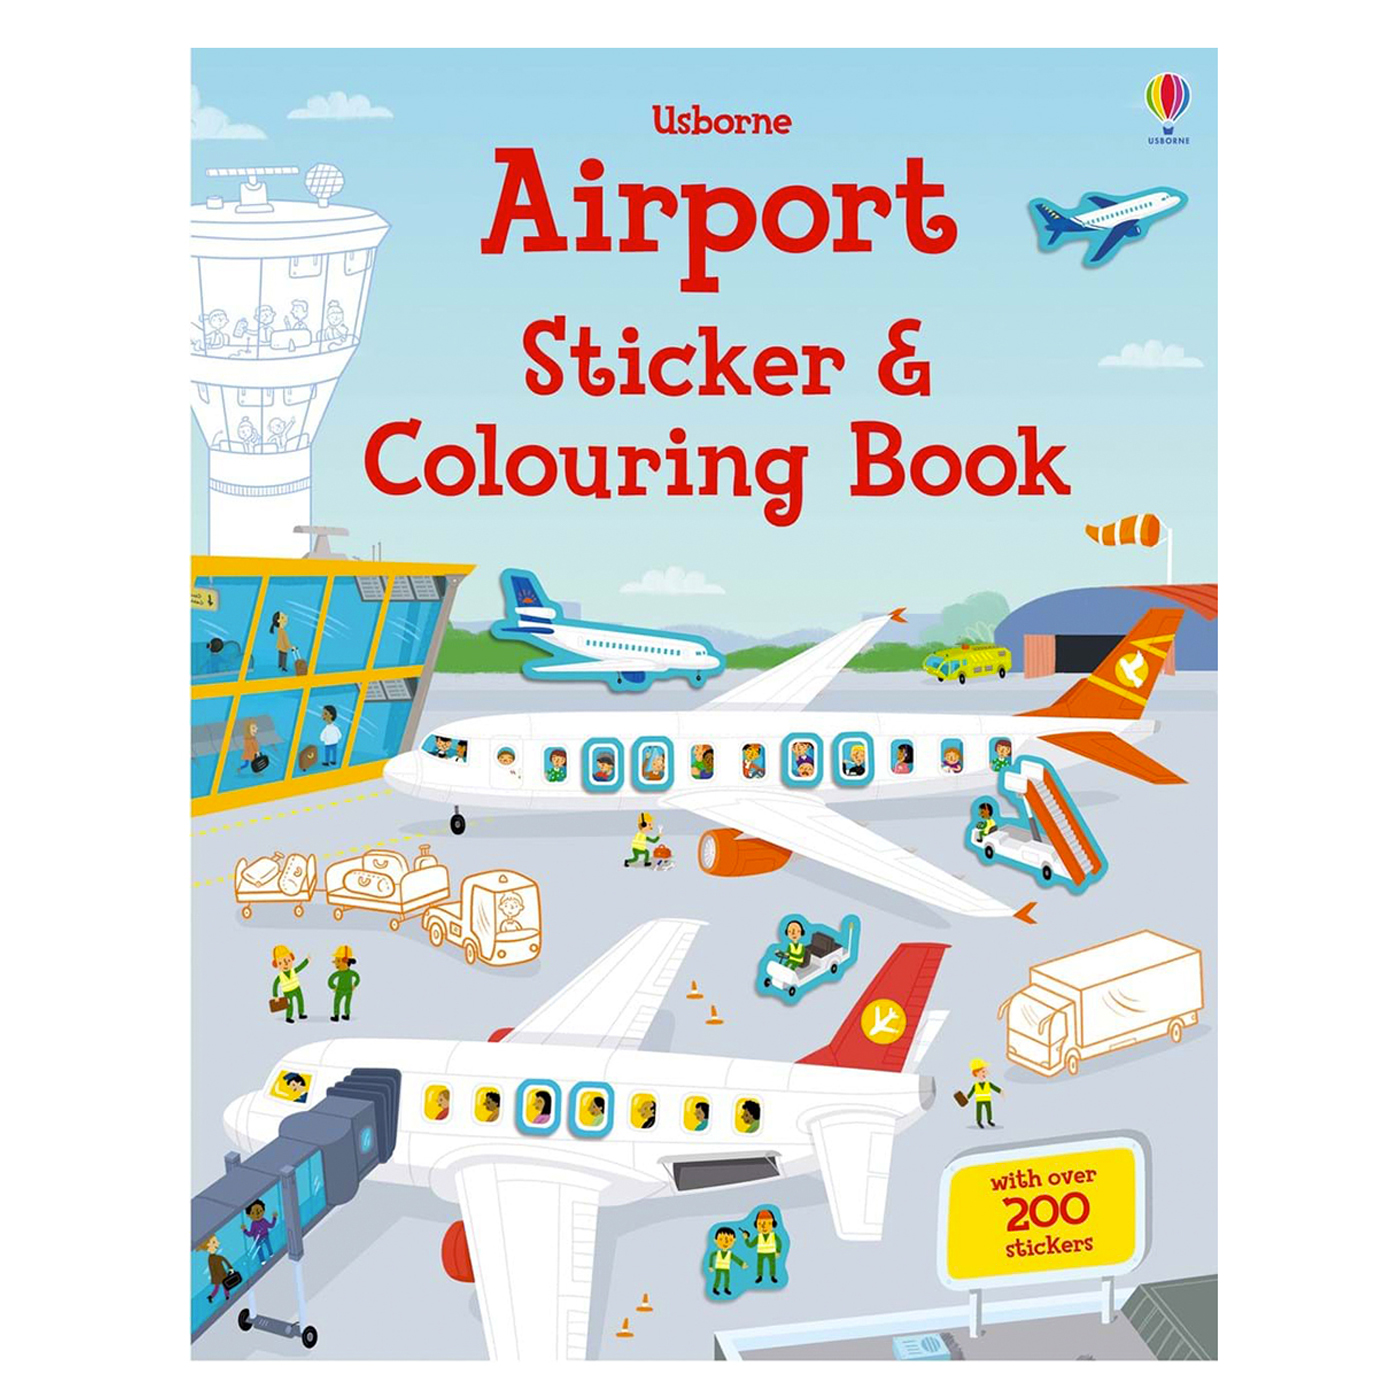  Airport Sticker and Colouring Book